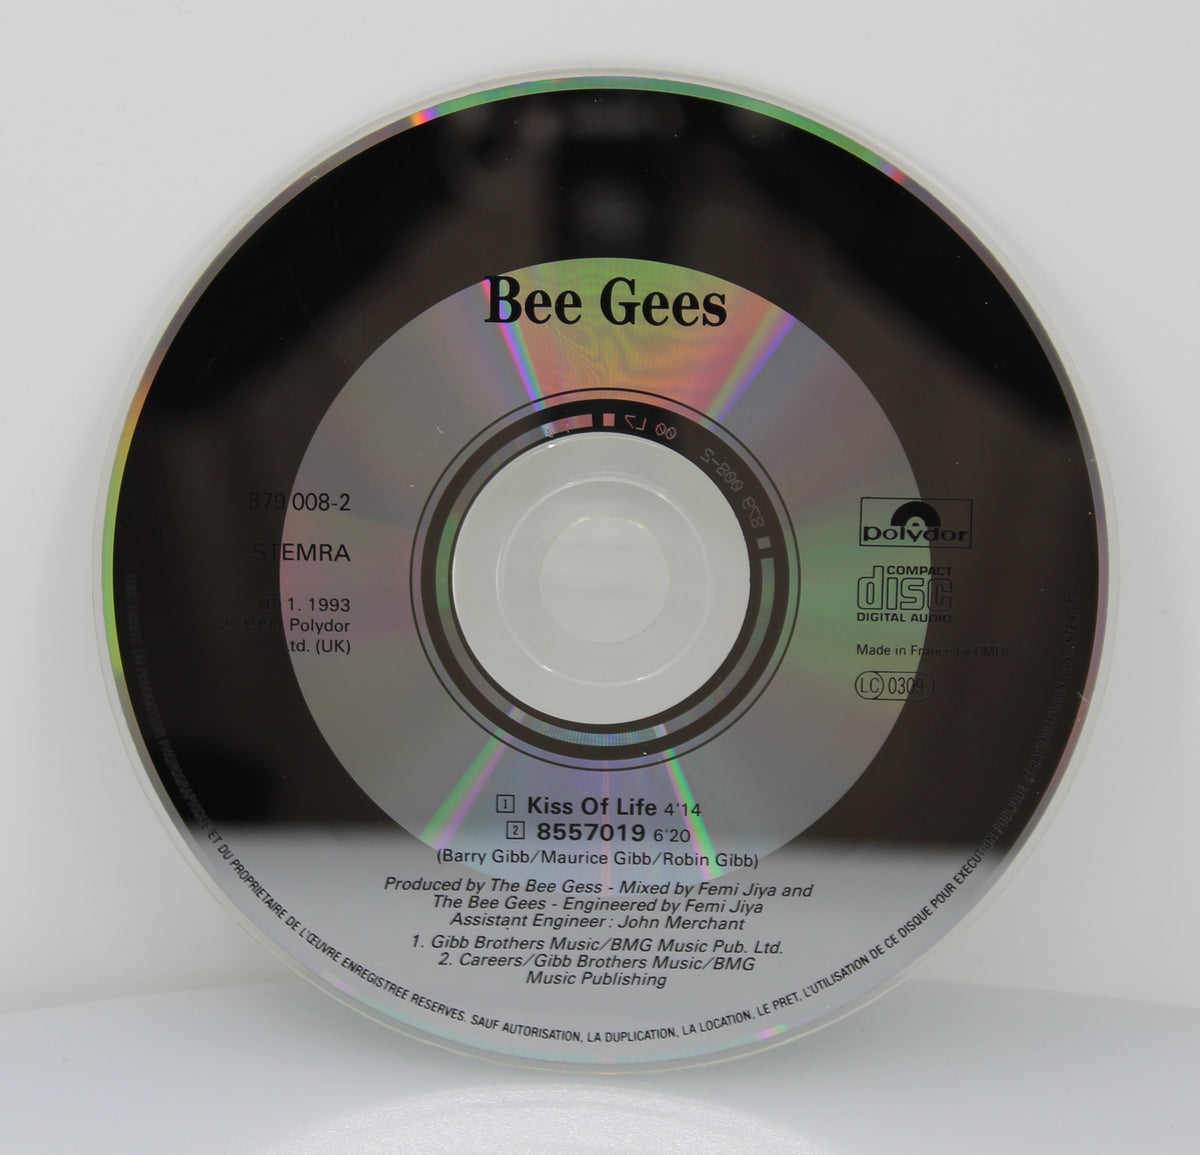 Bee Gees ‎– Kiss Of Life, CD, Single, France 1994